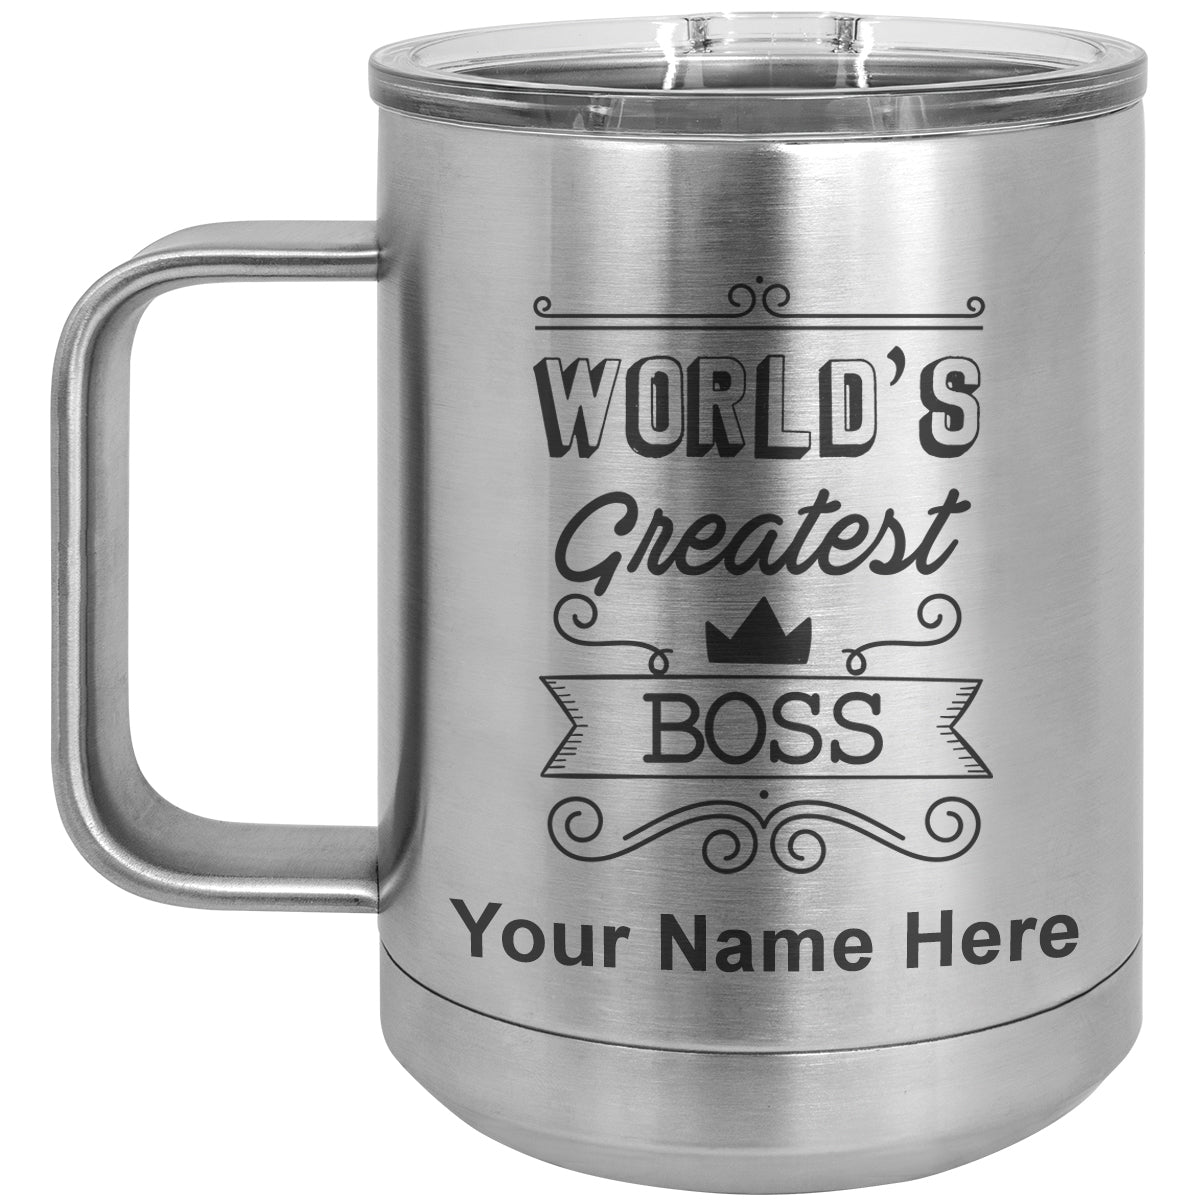 15oz Vacuum Insulated Coffee Mug, World's Greatest Boss, Personalized Engraving Included